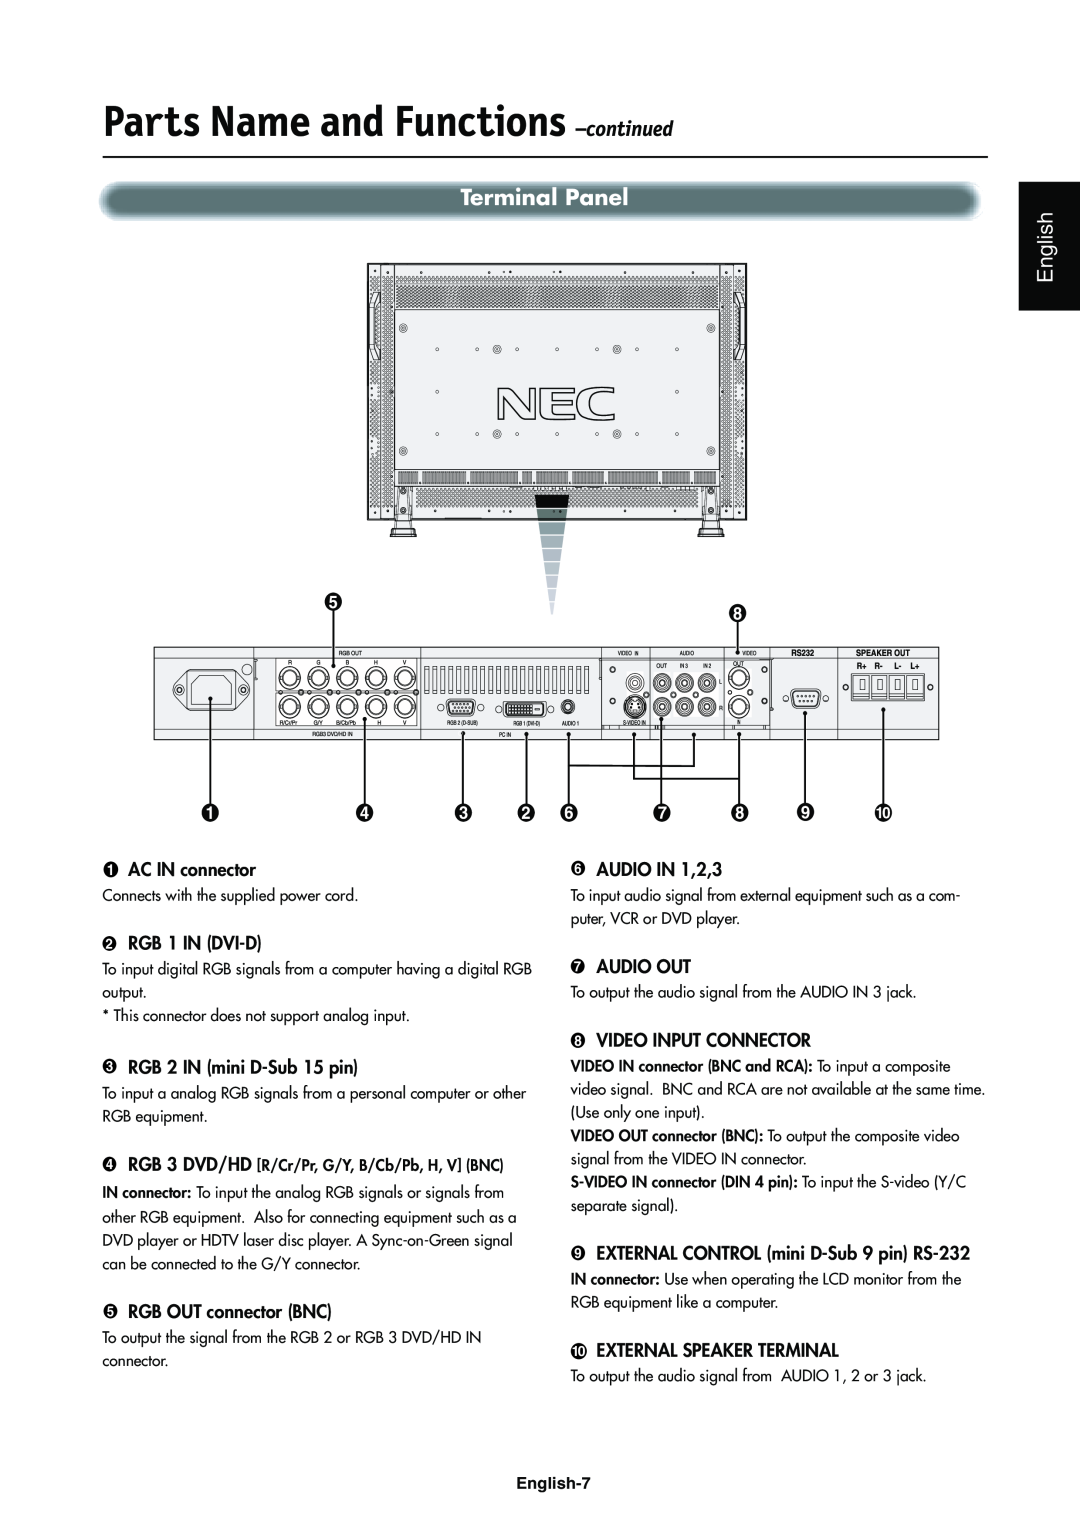 NEC LCD4000e manual Parts Name and Functions –continued, Terminal Panel, English-7 